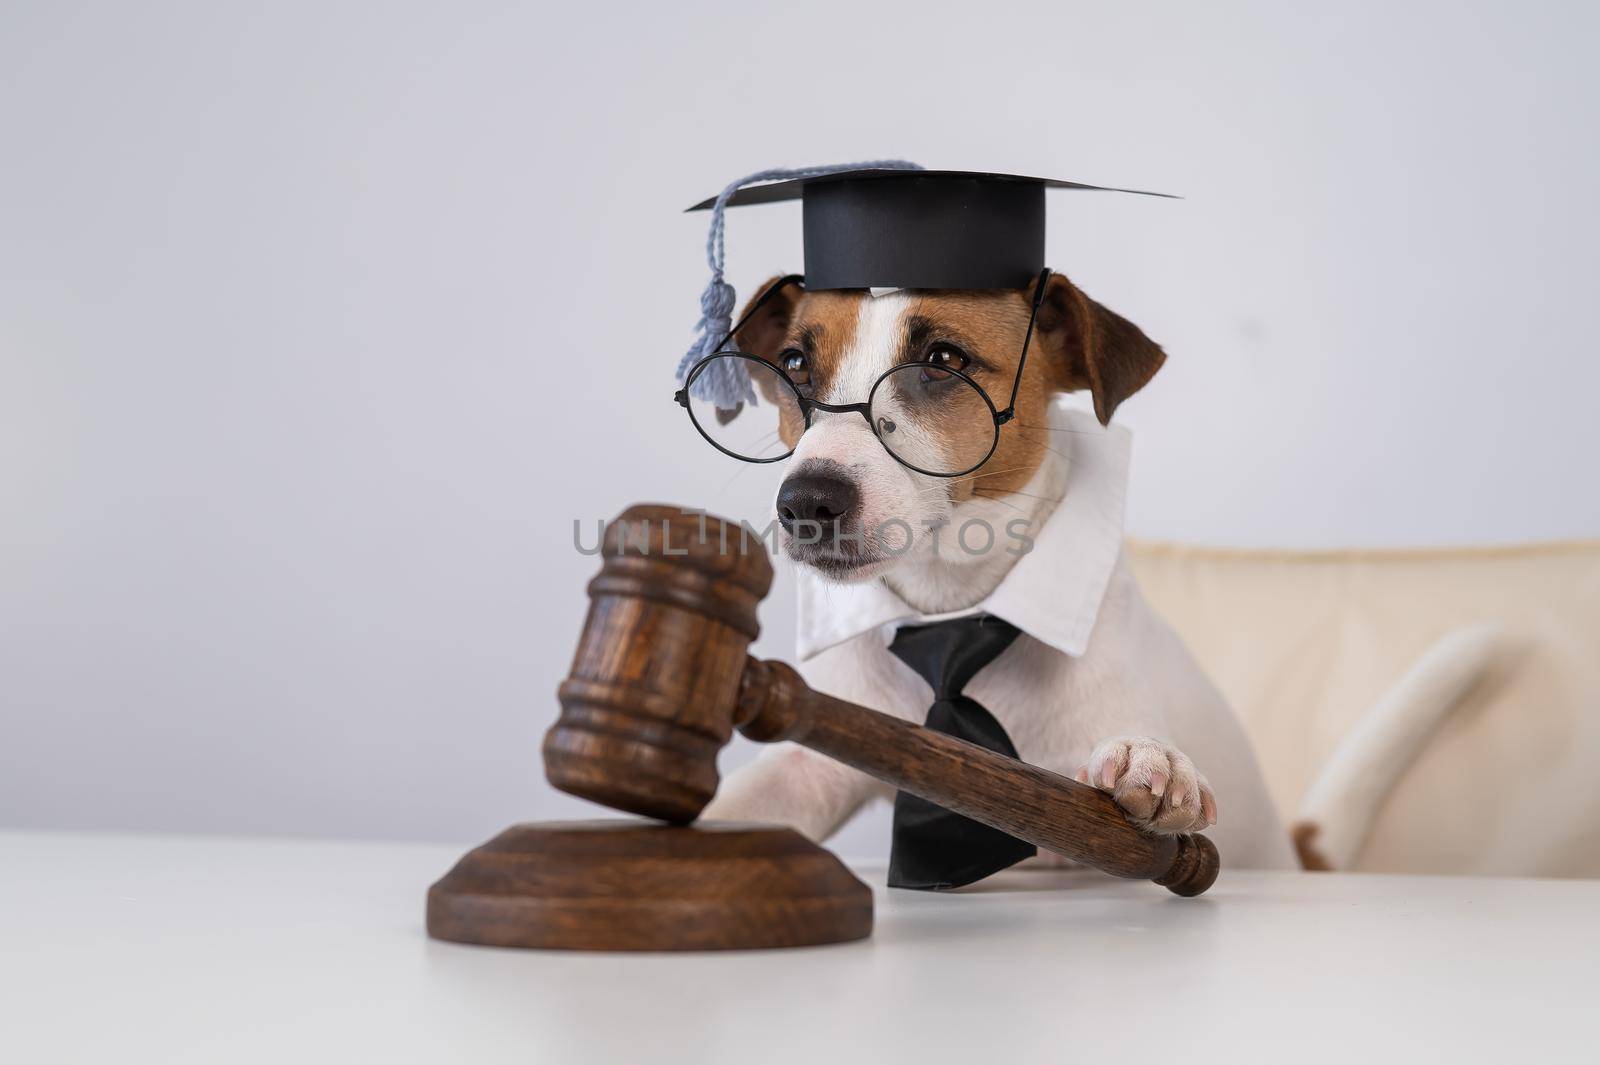 Dog jack russell terrier dressed as a judge and holding a gavel on a white background. by mrwed54